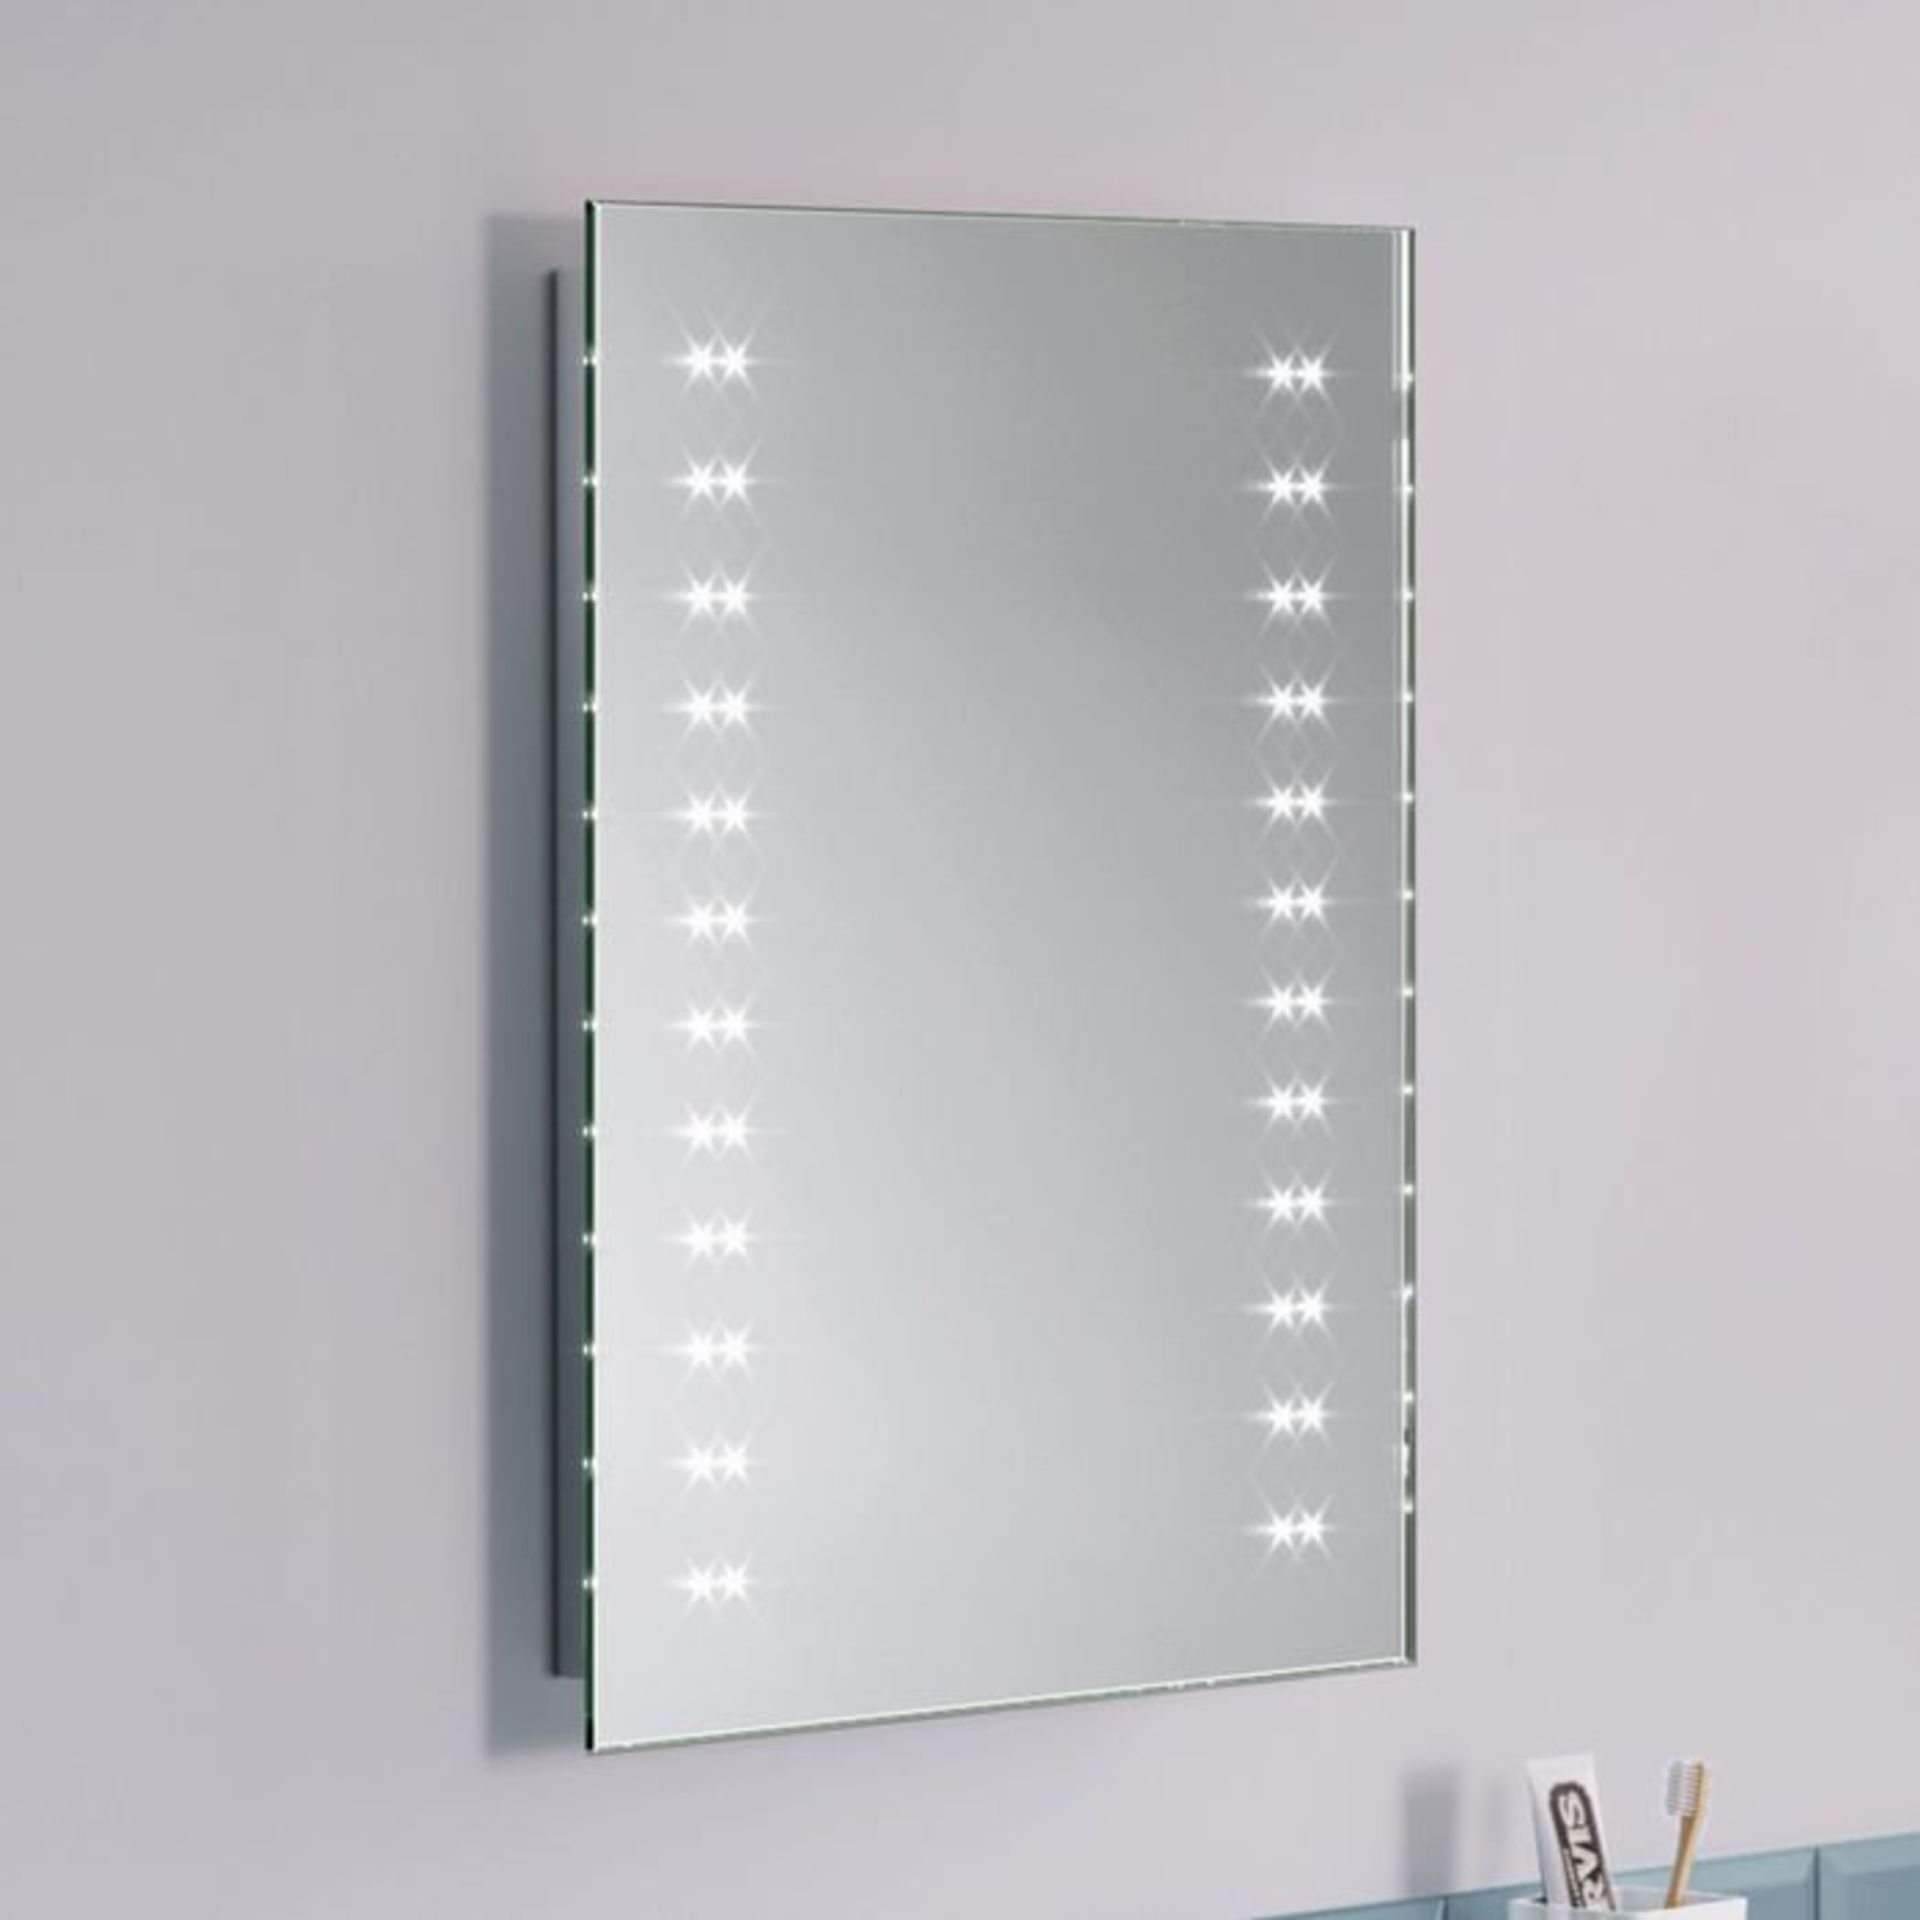 (L16) 390x500mm Galactic LED Mirror - Battery Operated, Energy saving controlled On / Off switch - Image 2 of 3